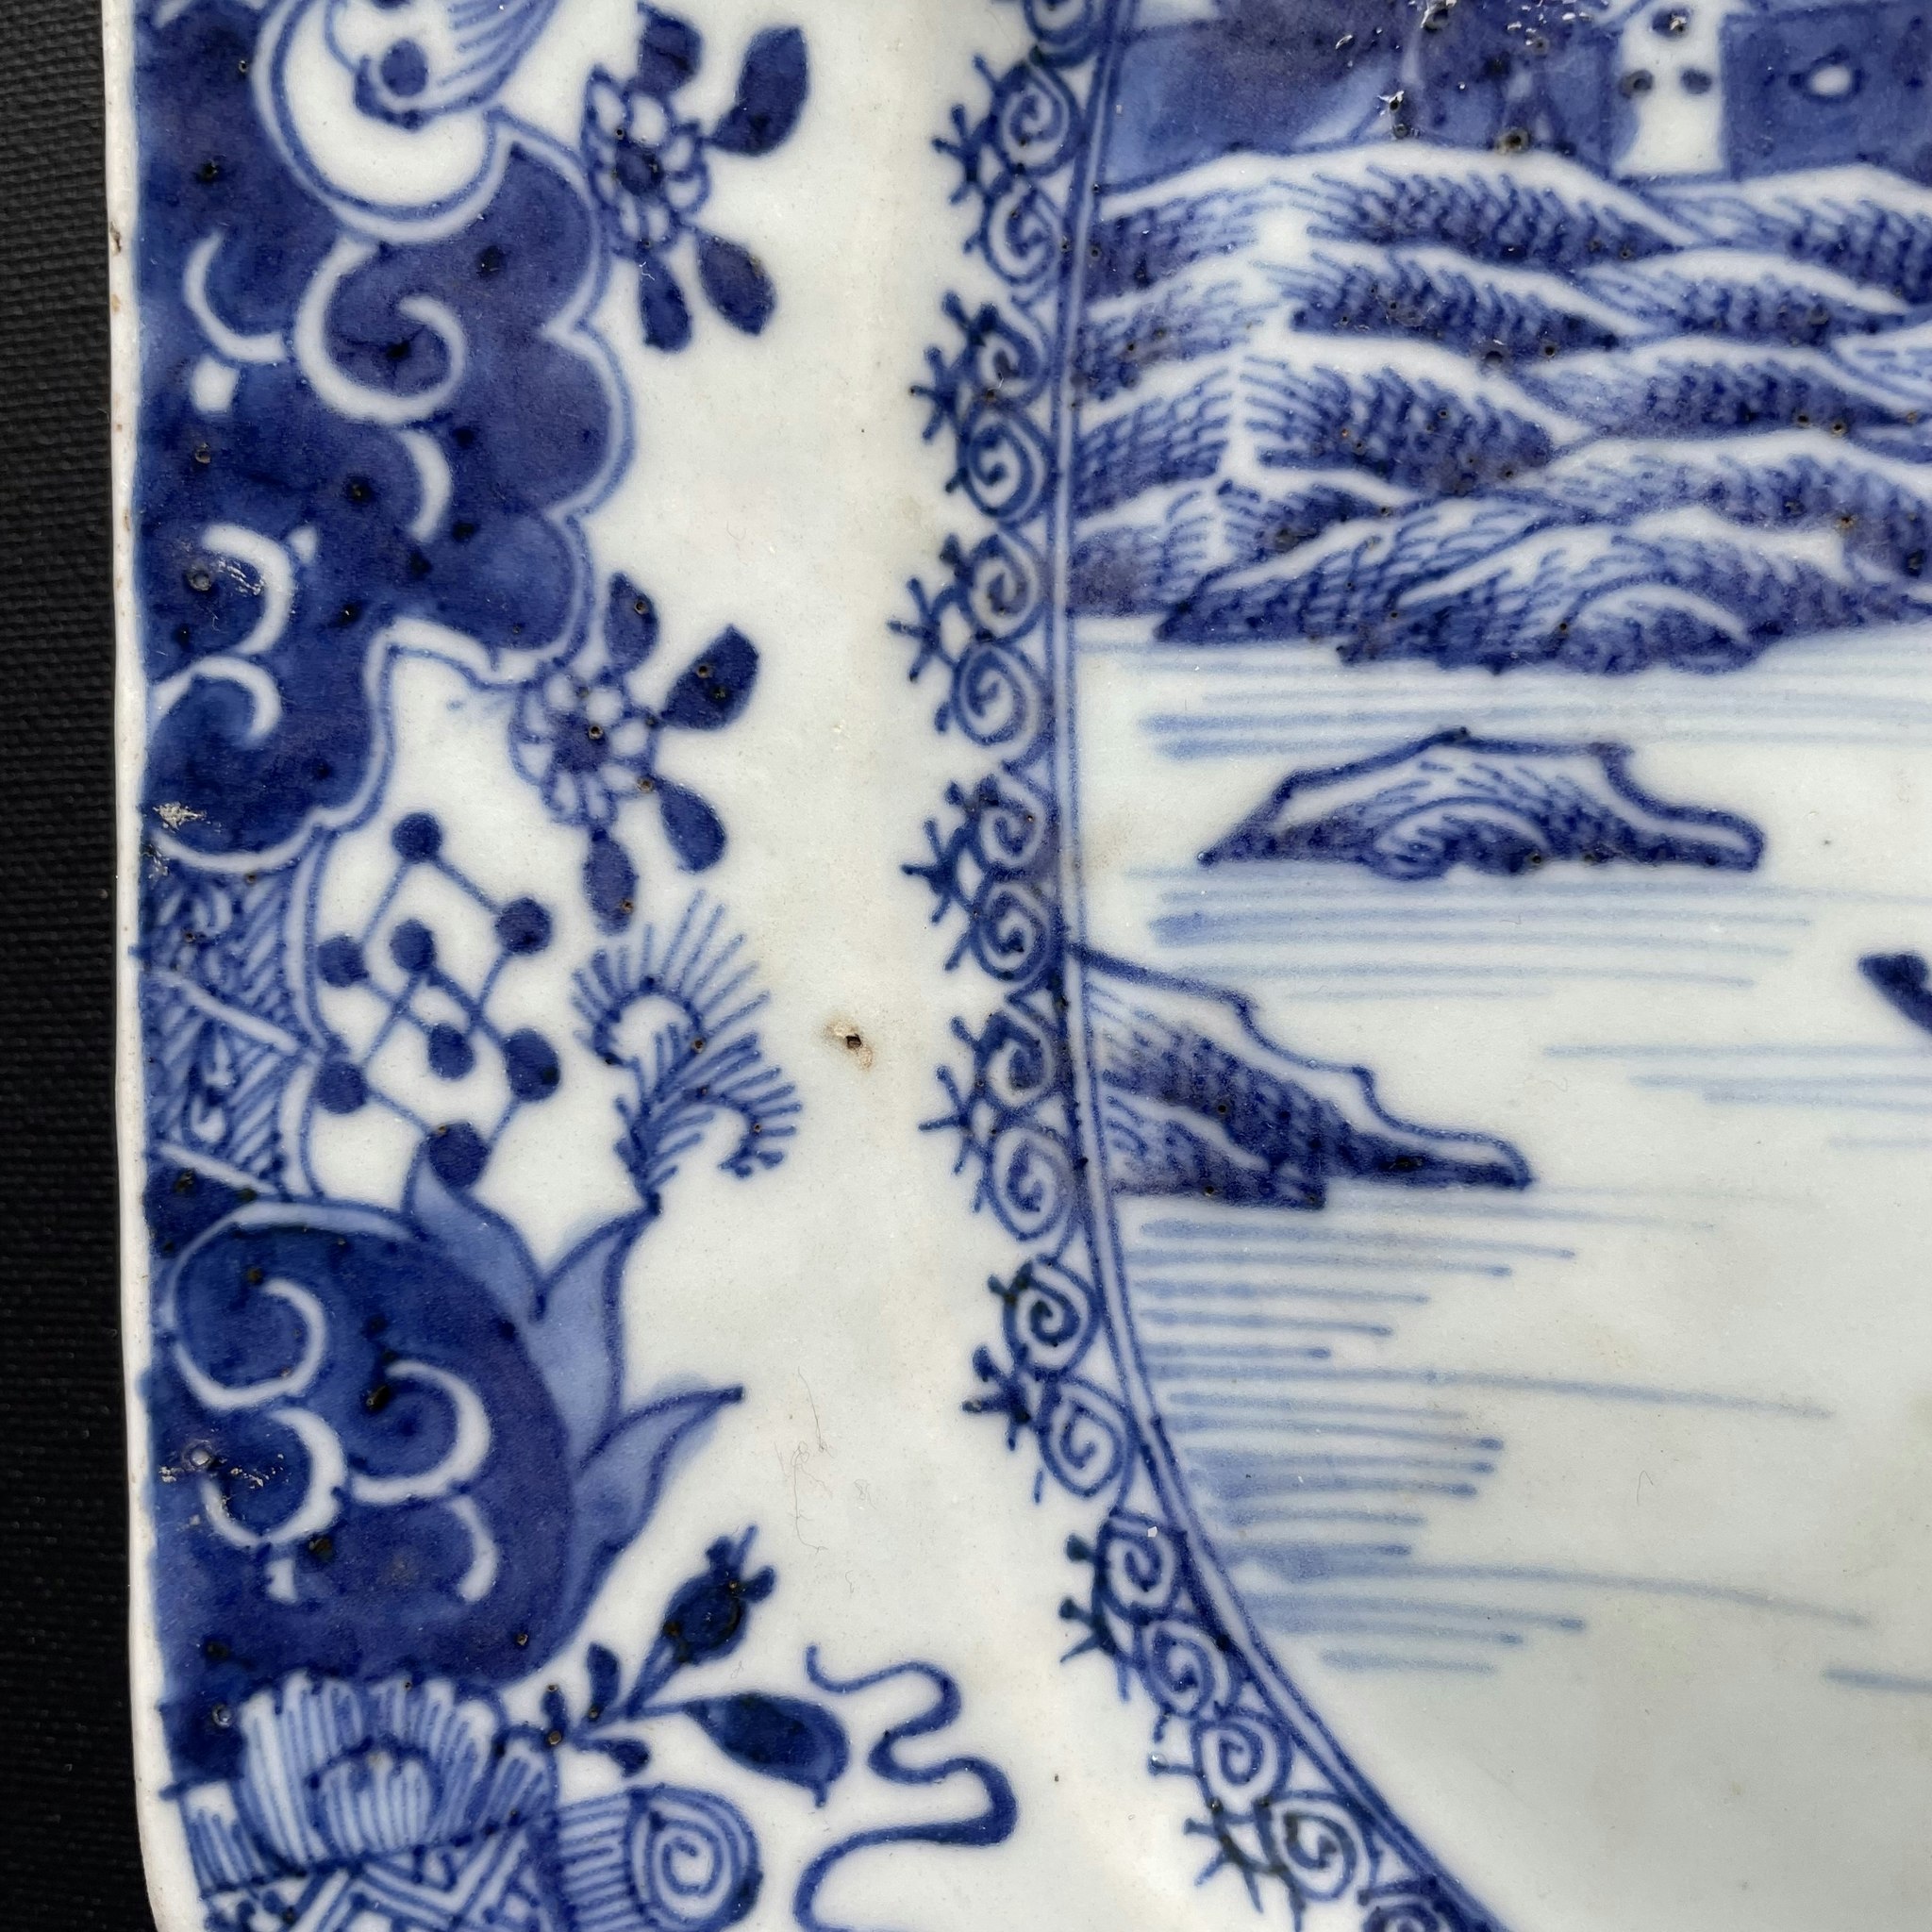 Antique Chinese Export Blue and White Porcelain platter, Qianlong period #1225